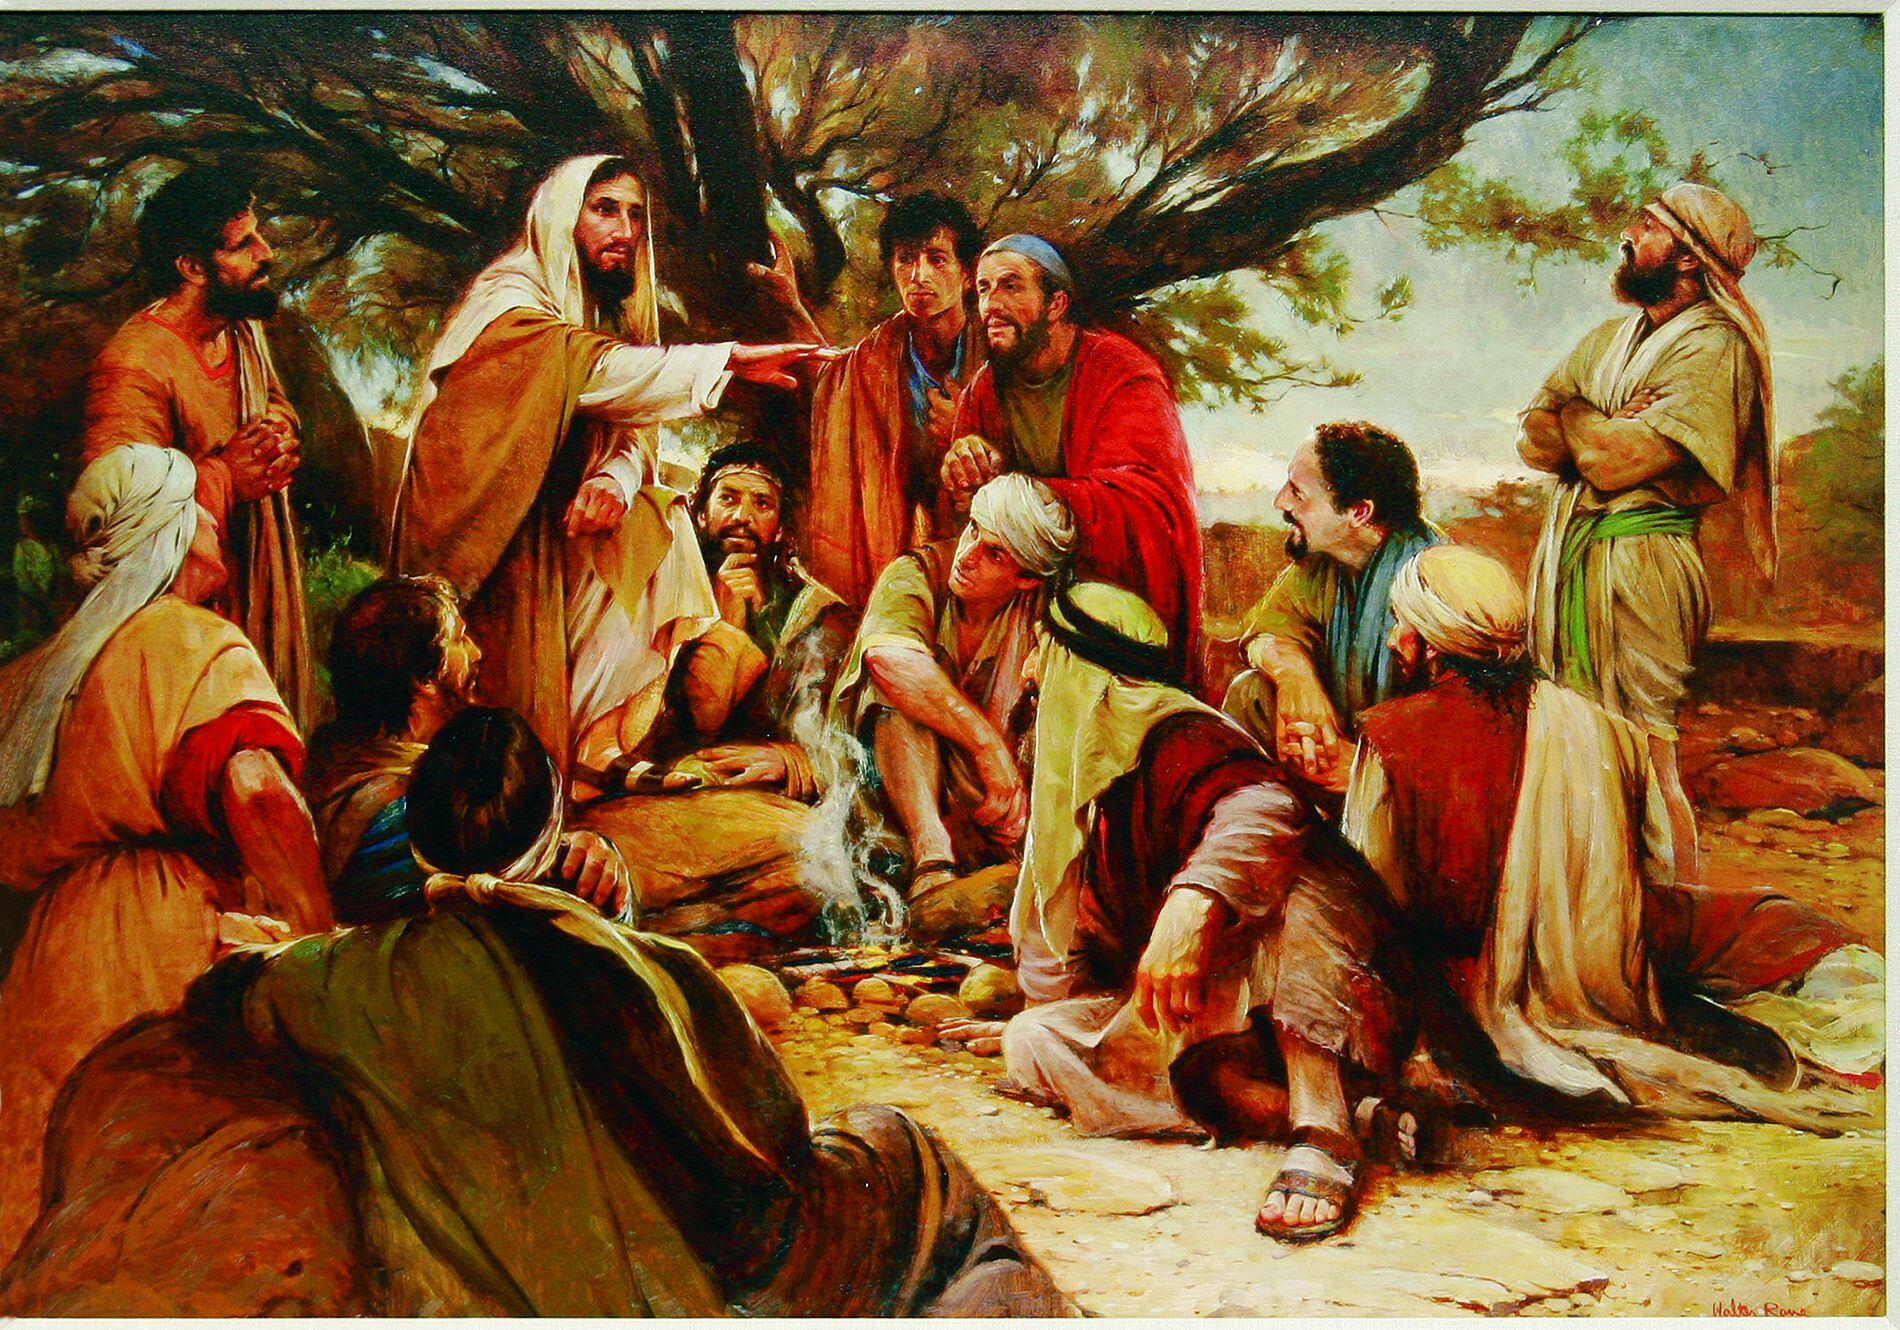 (The Church of Jesus Christ of Latter-day Saints) "These Twelve Jesus Sent Forth," by Walter Rane. Christ asked his followers to believe in him, Tribune columnist Gordon Monson states, and have faith in him.